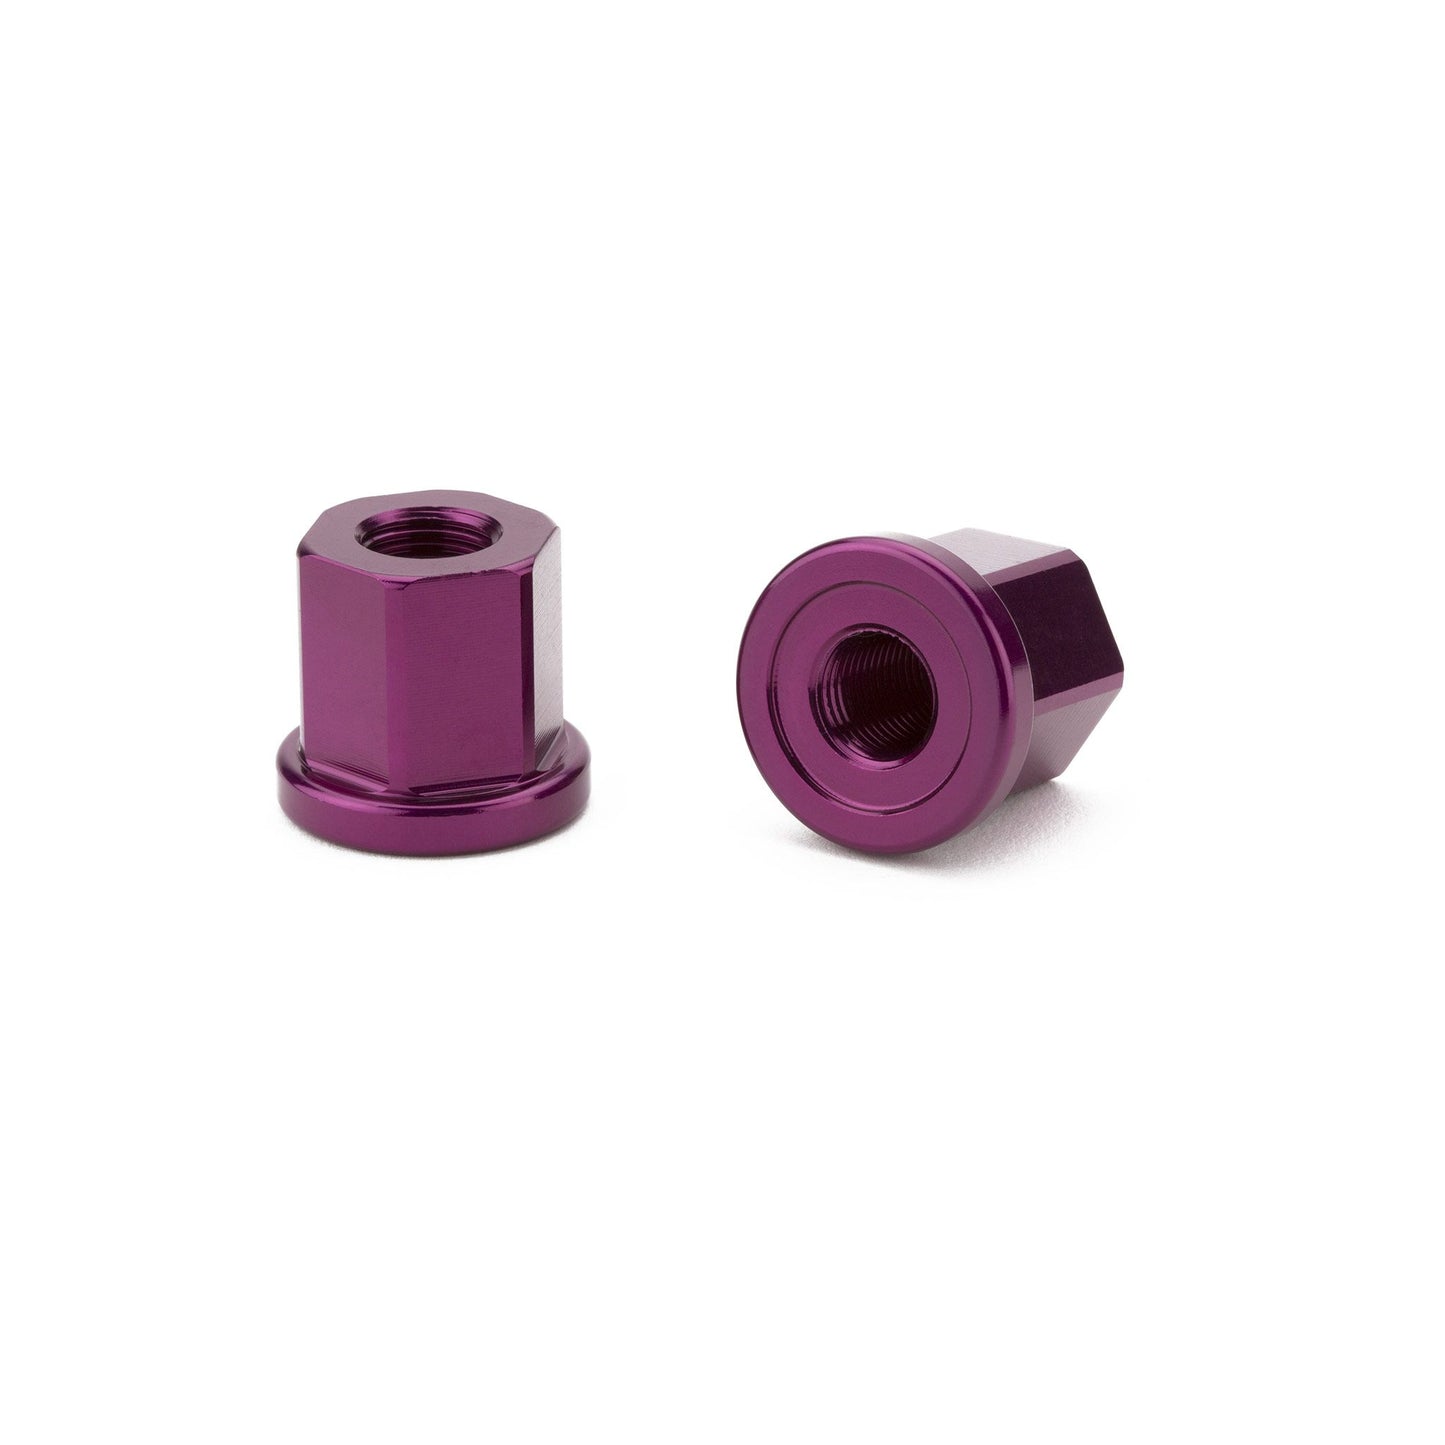 MISSION ALLOY AXLE NUTS